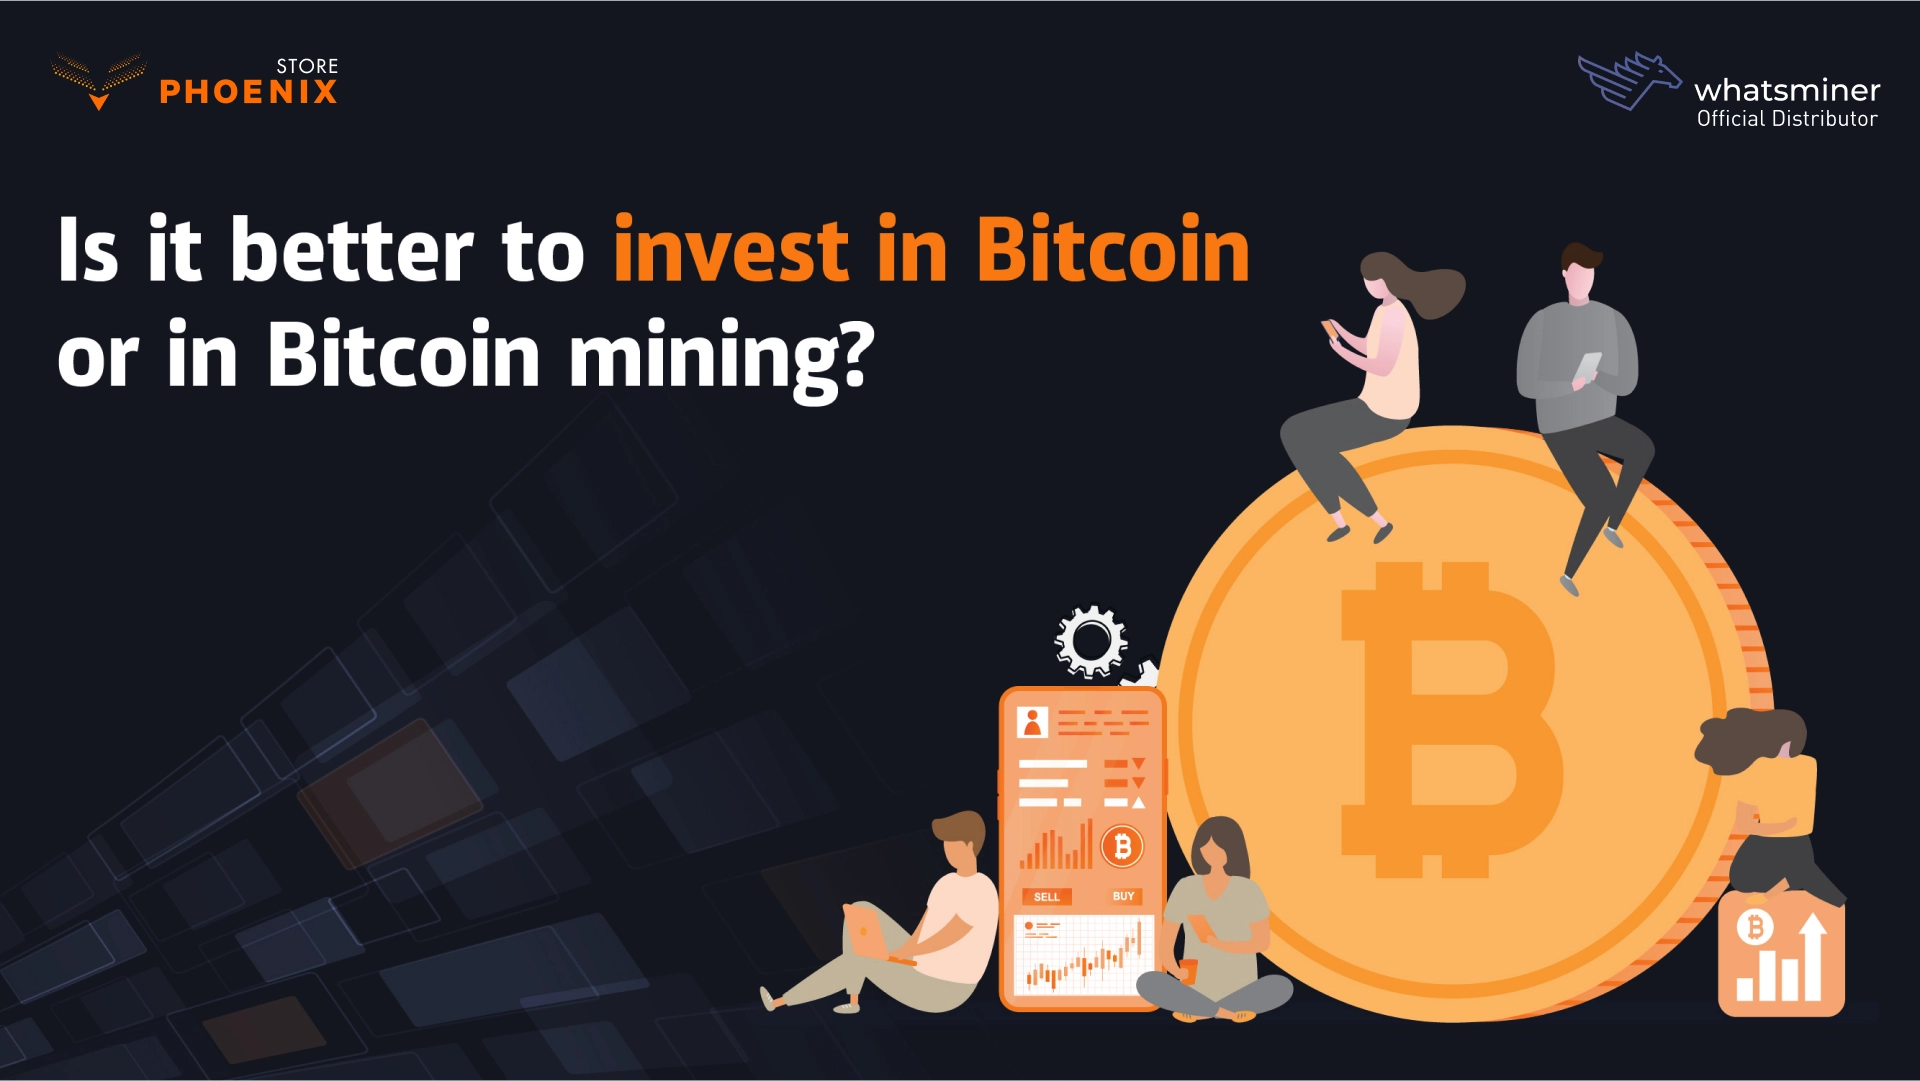 Is It Better to Invest in Bitcoin or Bitcoin Mining?